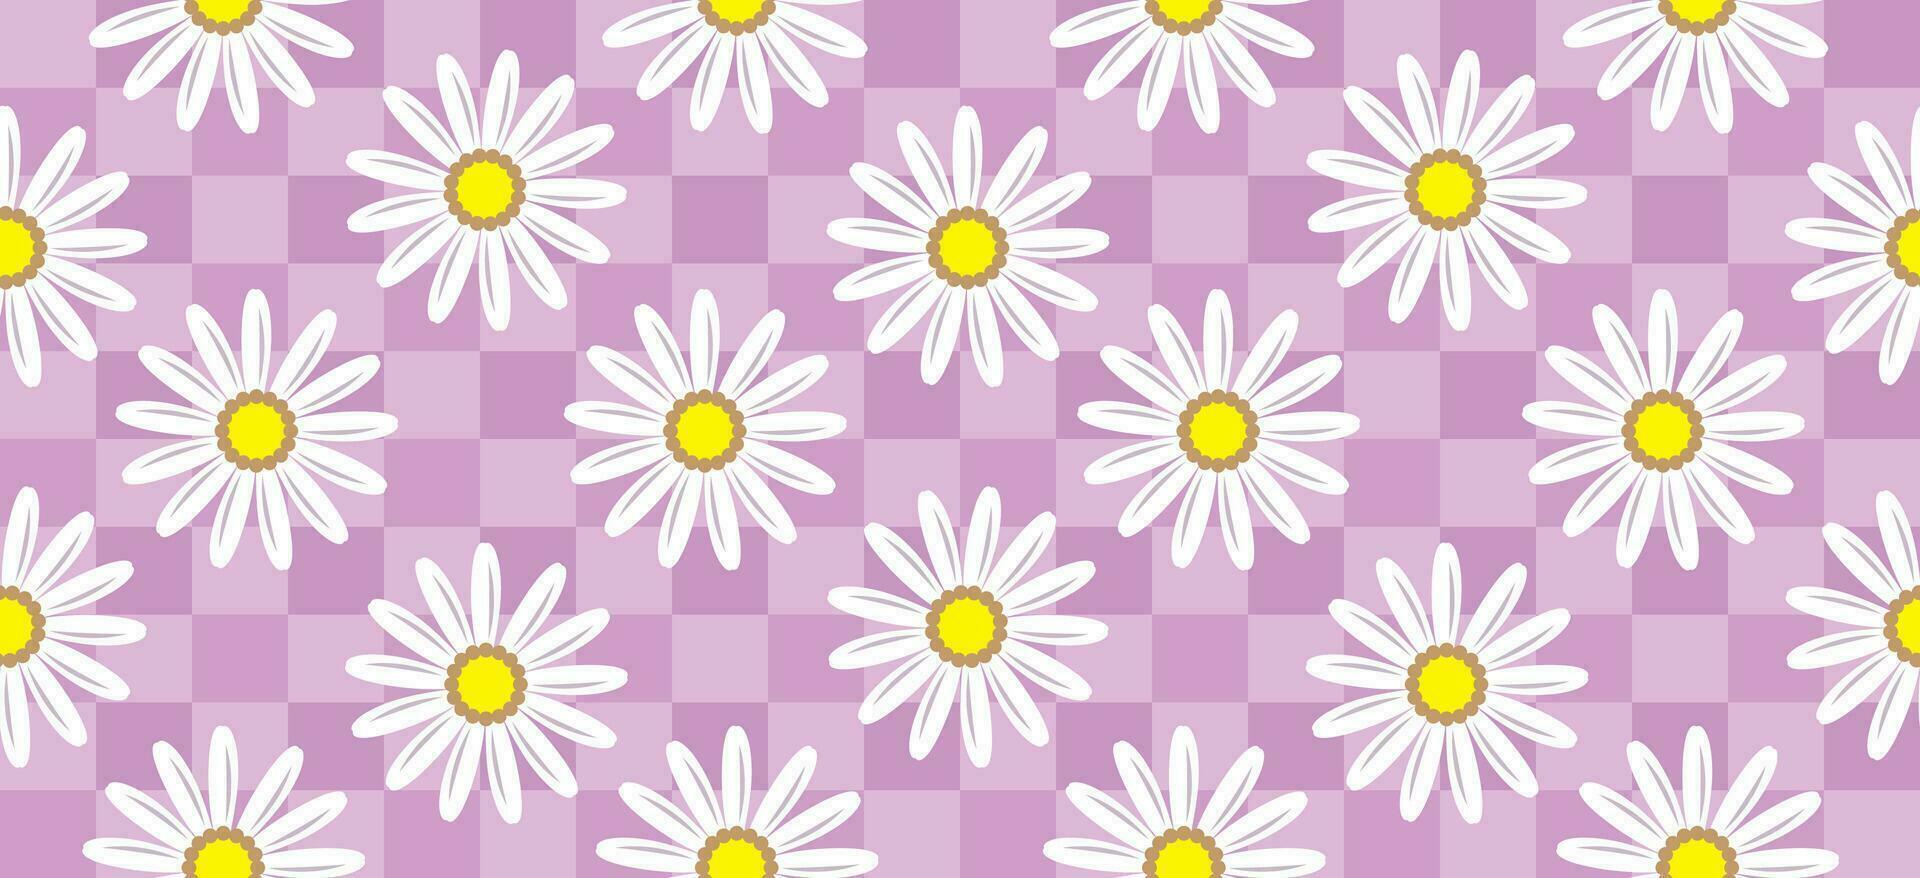 Daisy flower pattern. Beautiful White flower background. floral blossom daisy. Spring white flower design vector. Daisy's on a purple background. Vector design for fabric, wrap paper,  print card.